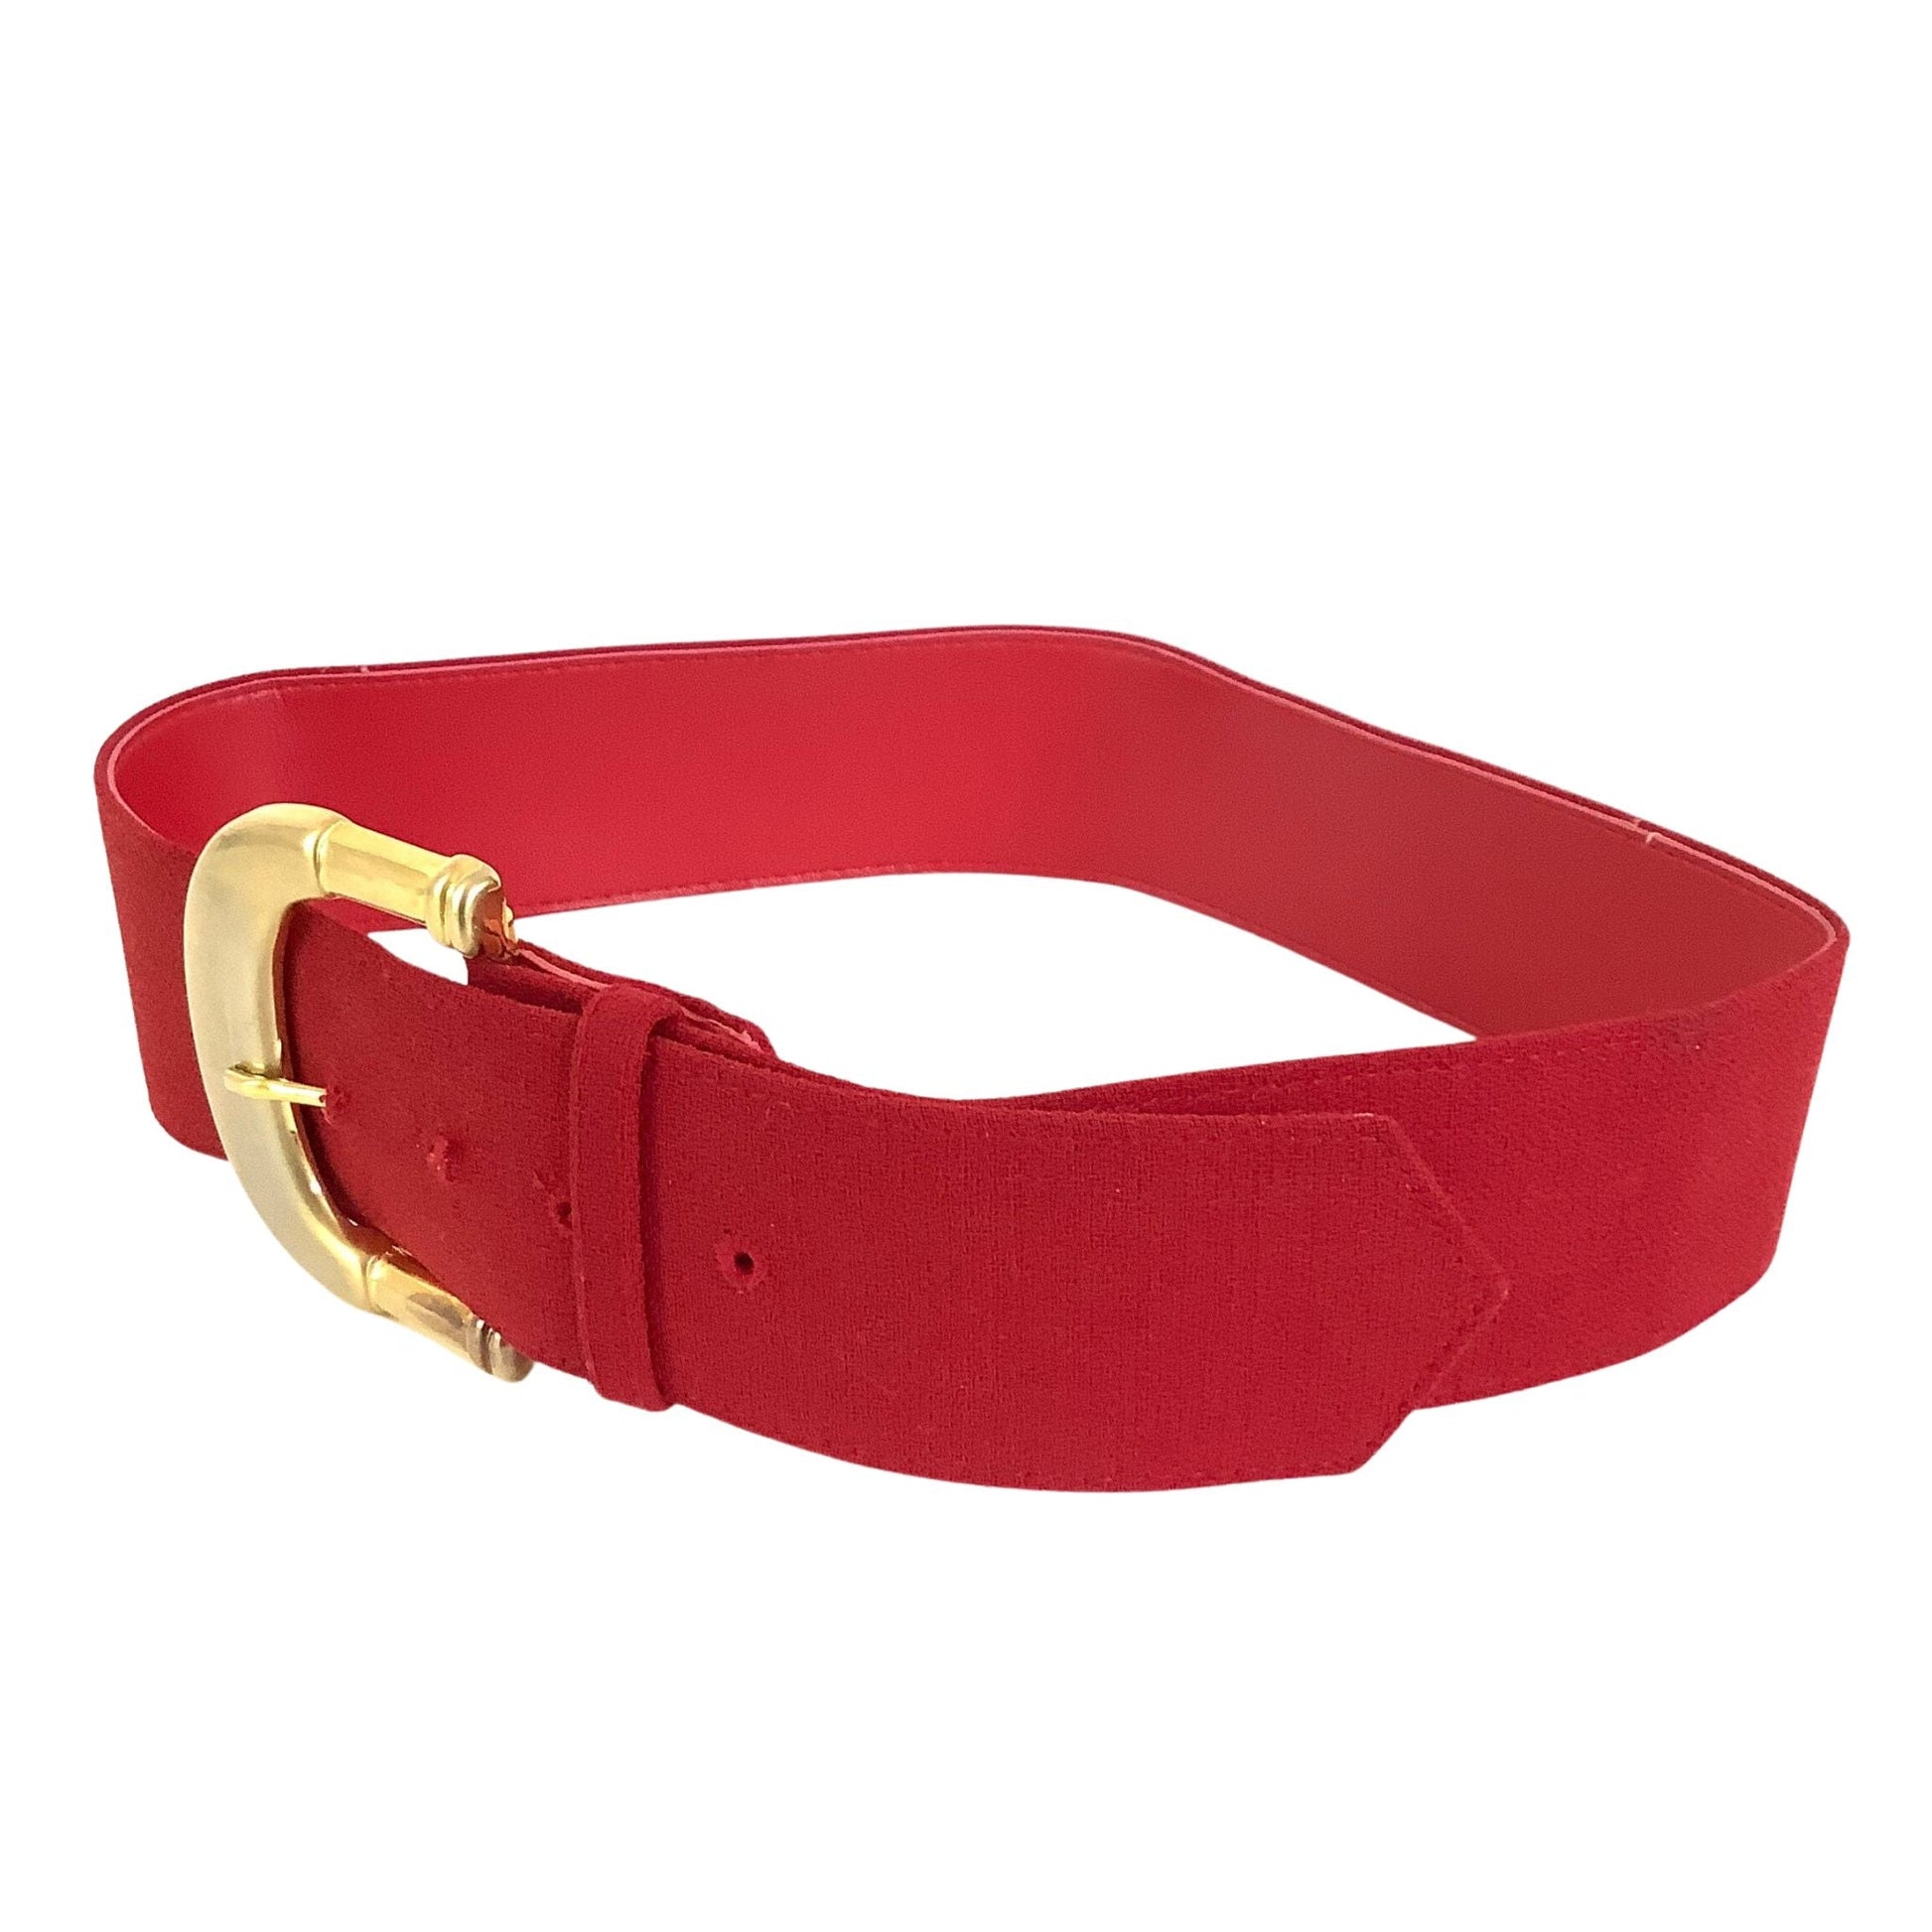 1970s Red Fabric Belt Extra Small / Red / Vintage 1970s